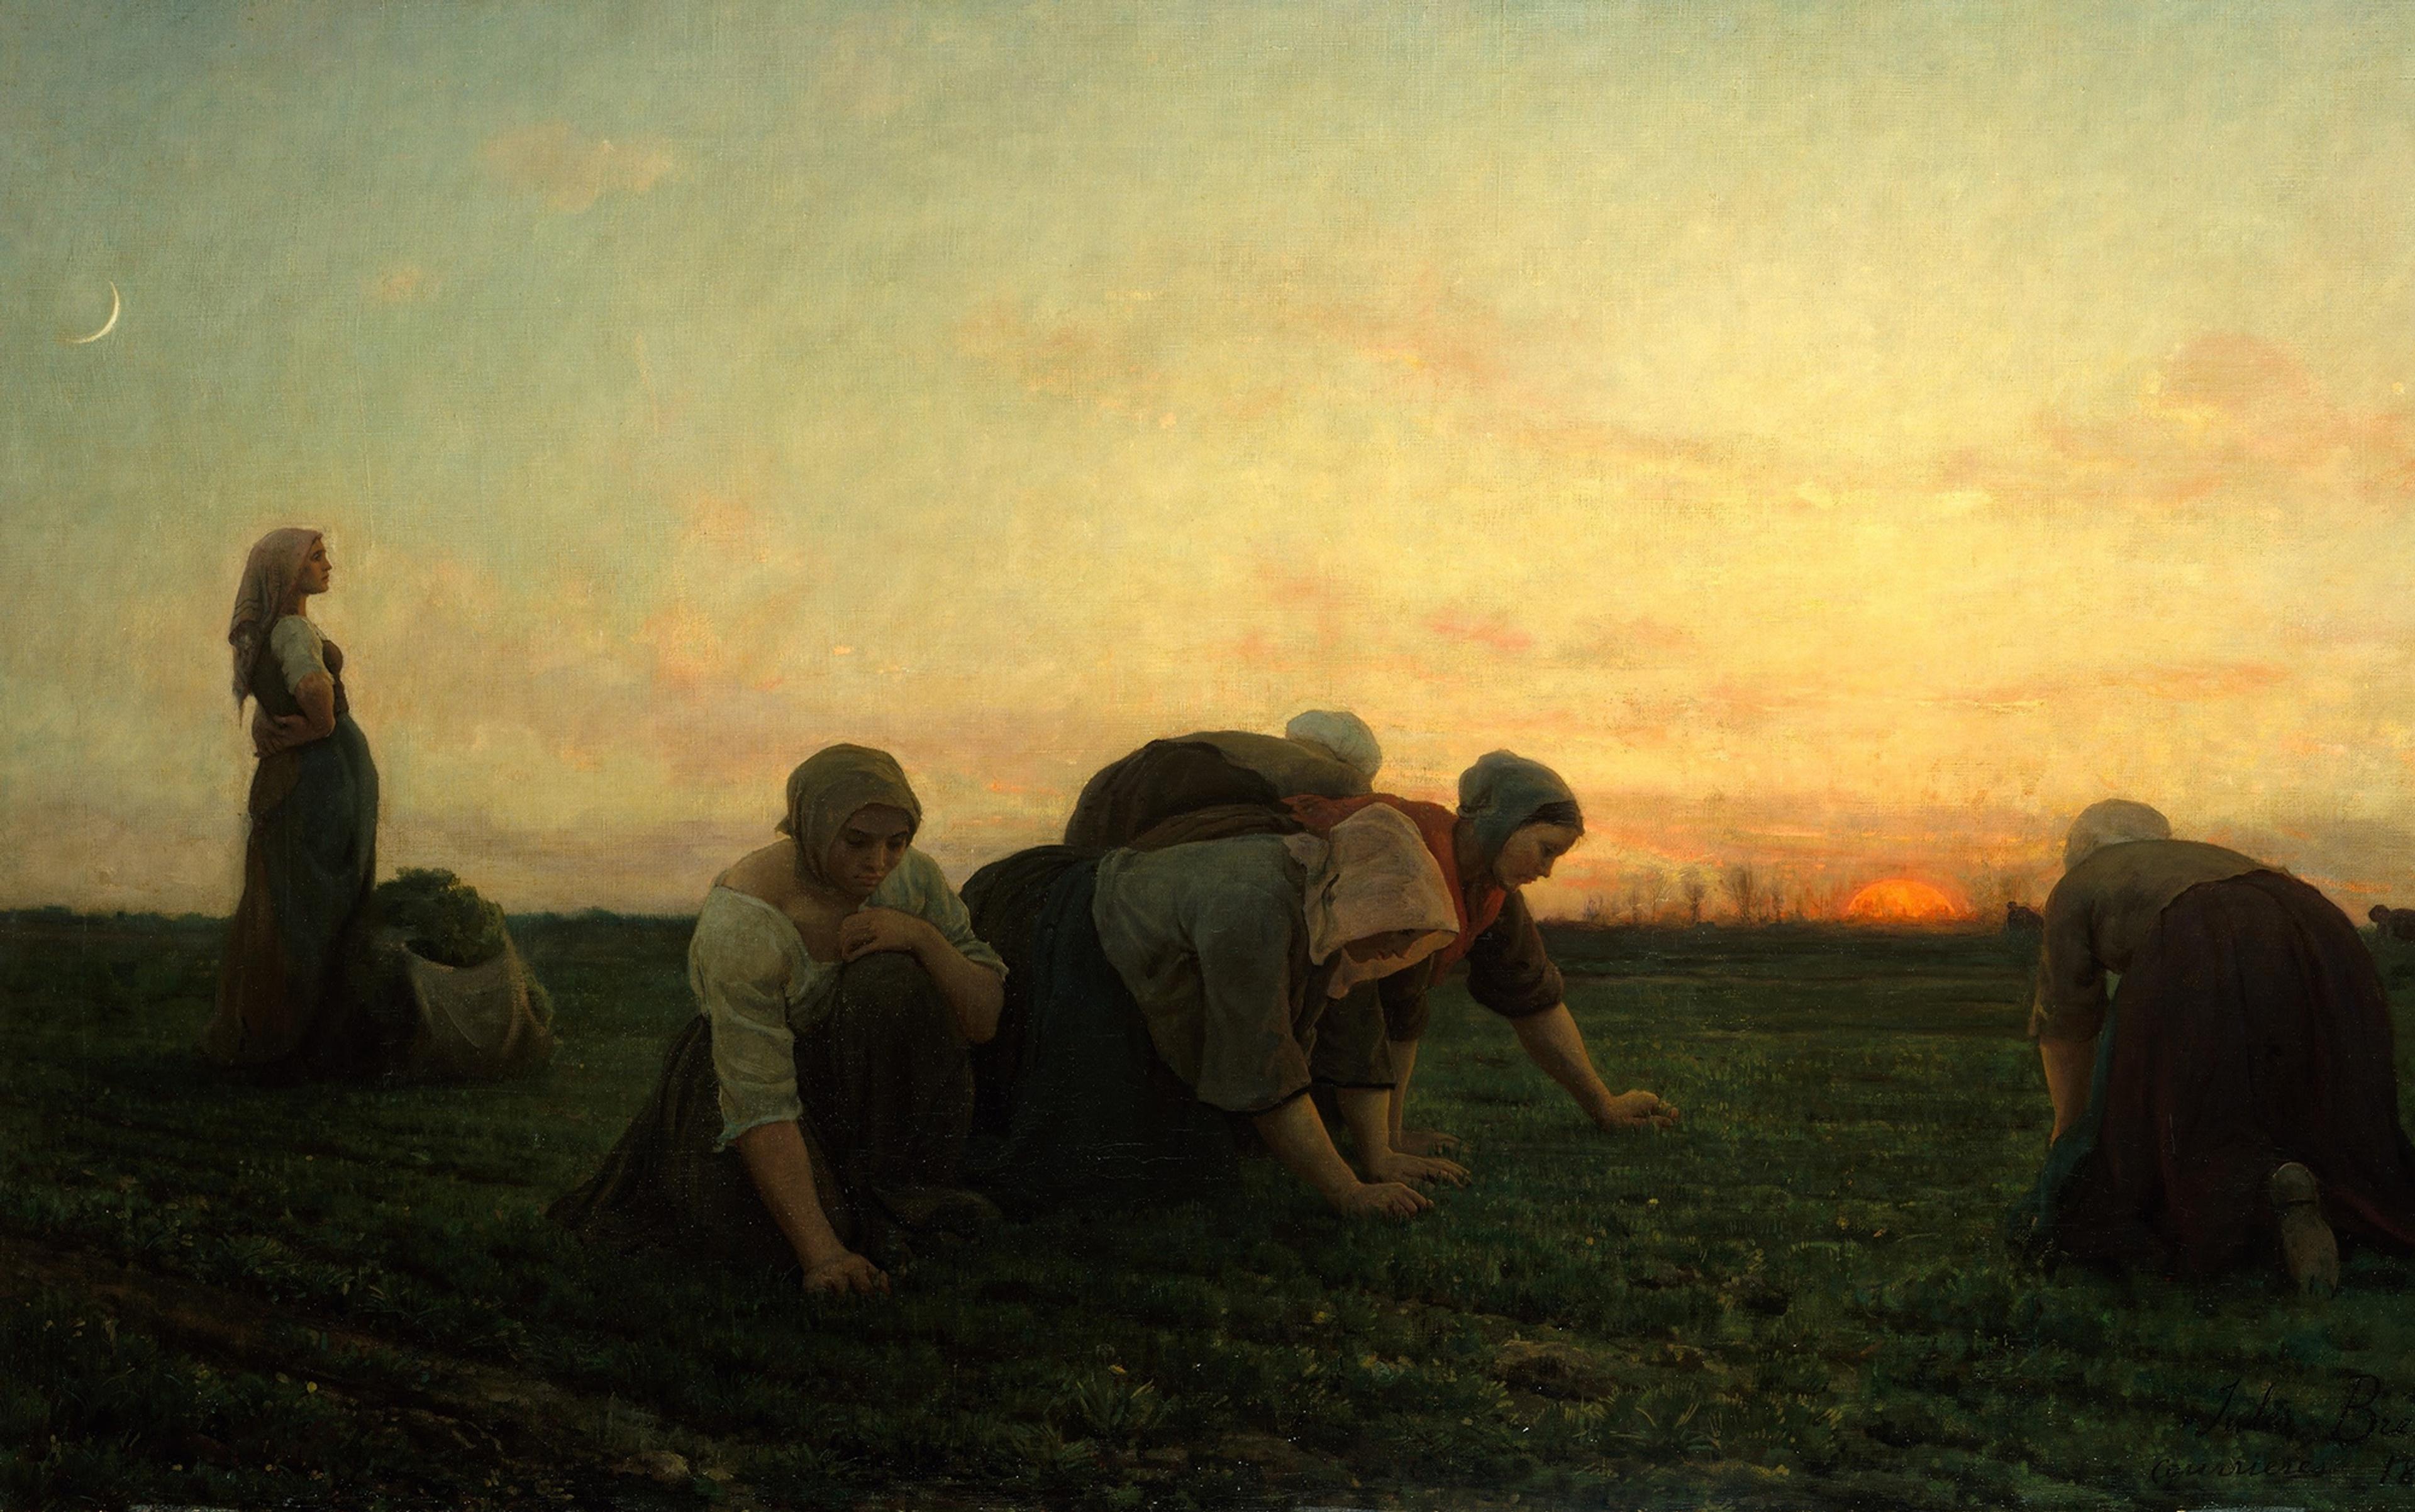 Painting of five women working in a field at sunset. Four are bent over tending to the soil, and one stands to the left looking at the sky with a bag on the ground beside her. The sky is a gradient of blue and orange with a visible crescent moon.